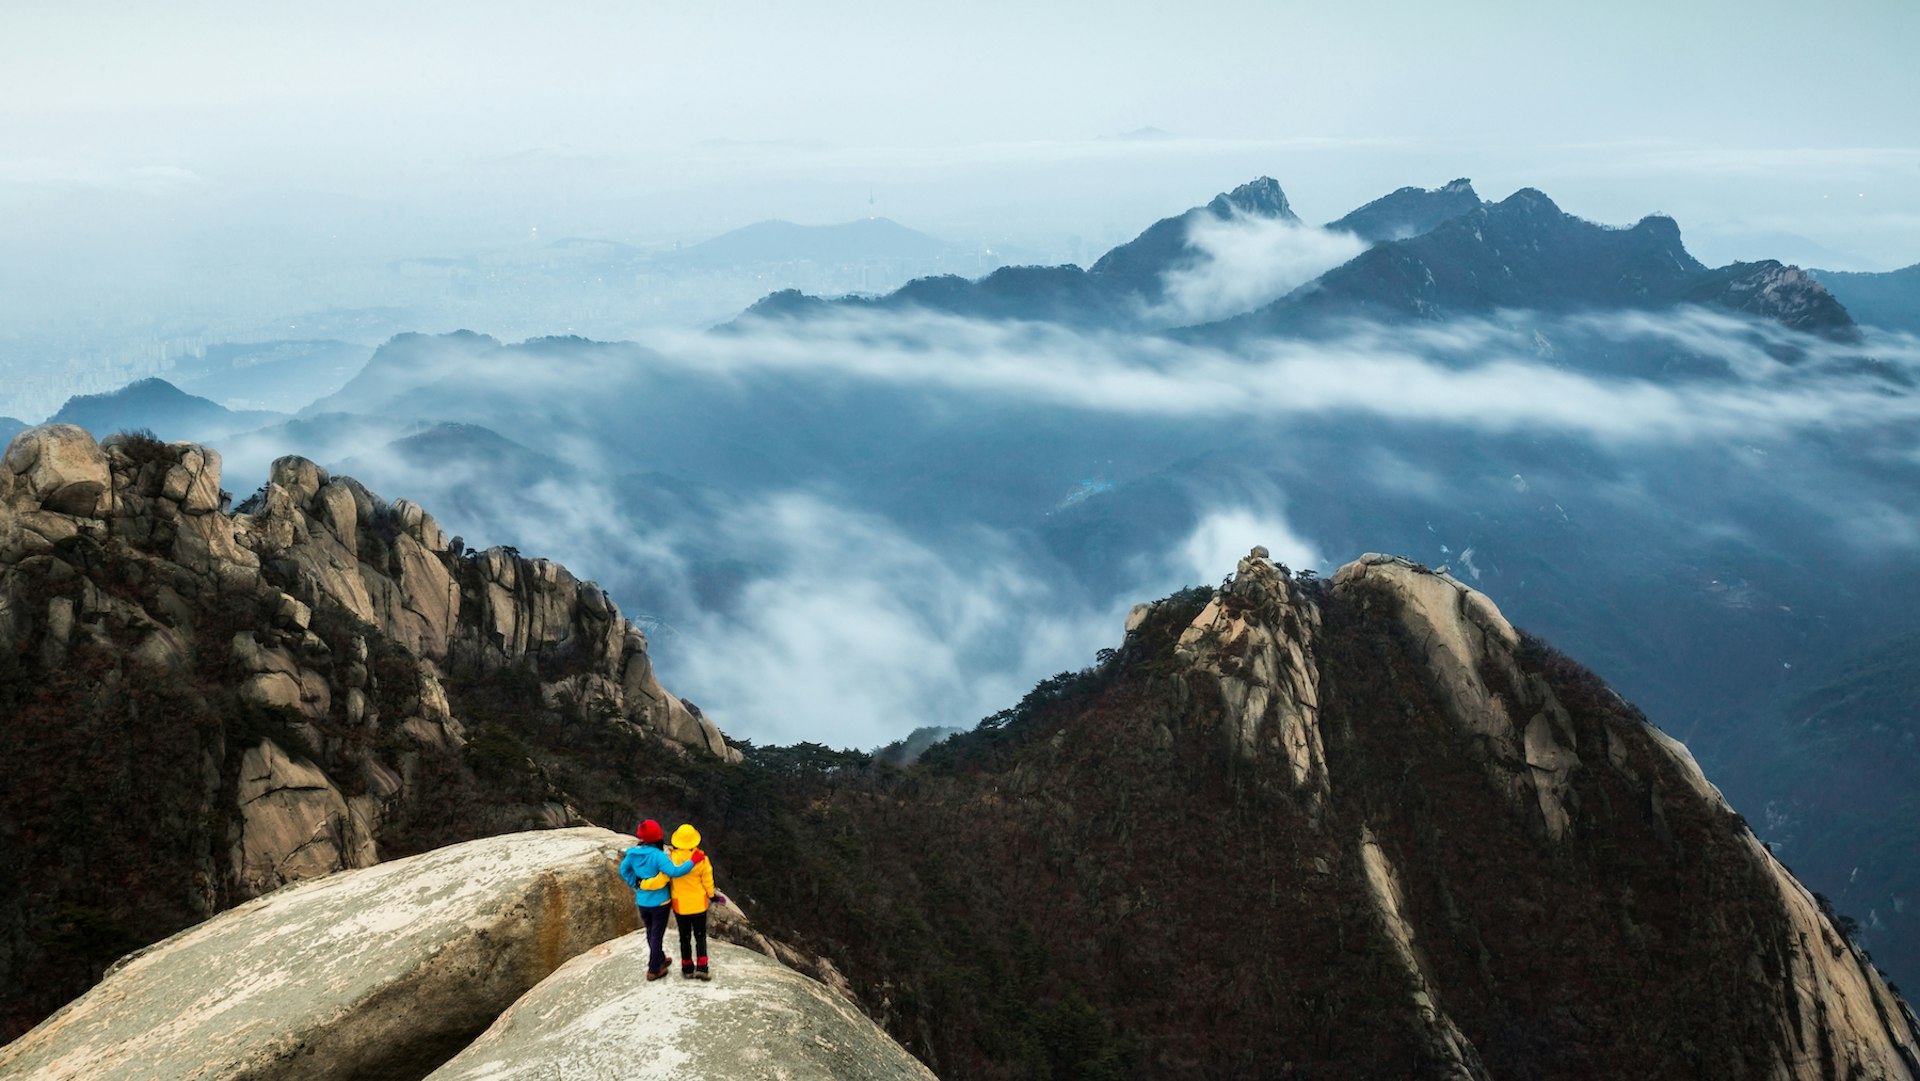 Two hikers look at a vista from atop a rock. In the background, clouds cover mountain peaks